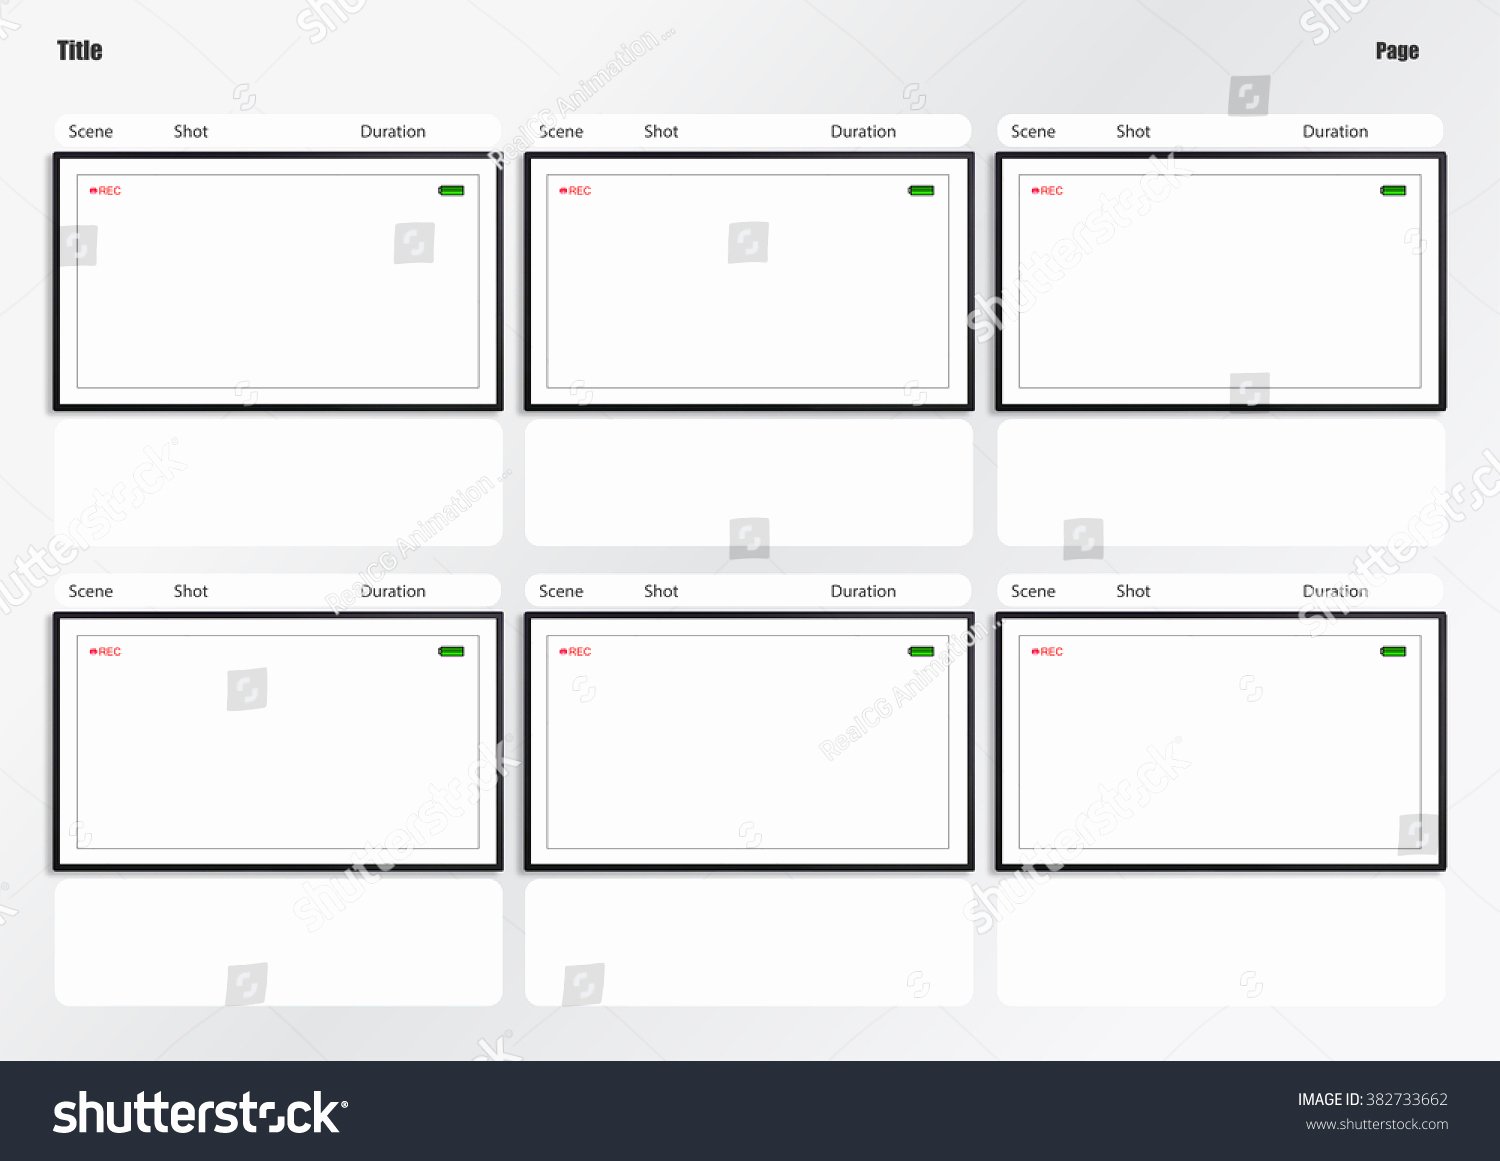 Professional Storyboard Template for Easy to